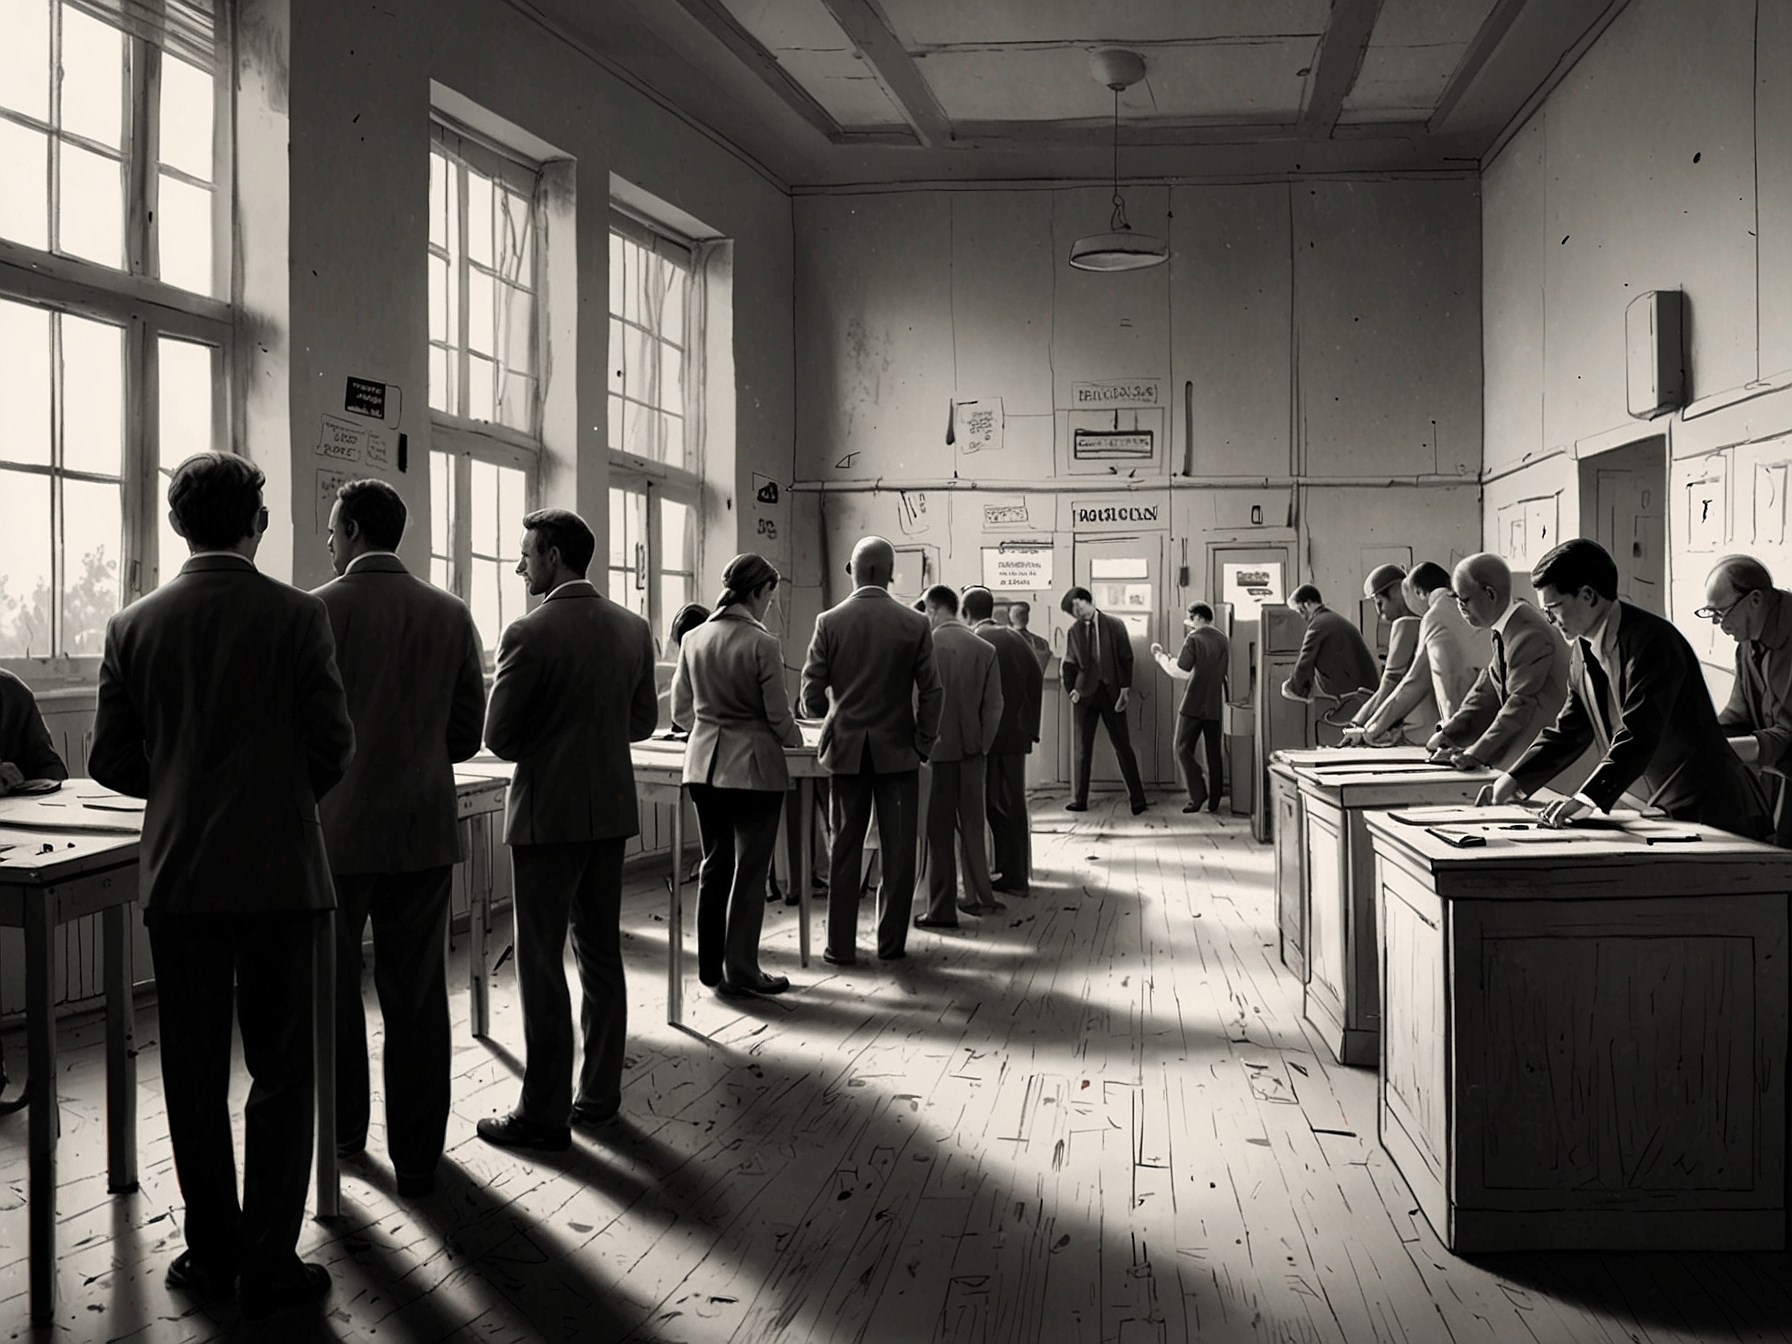 A bustling polling station with citizens casting their votes, representing the essential first step in the democratic process of electing a new government.